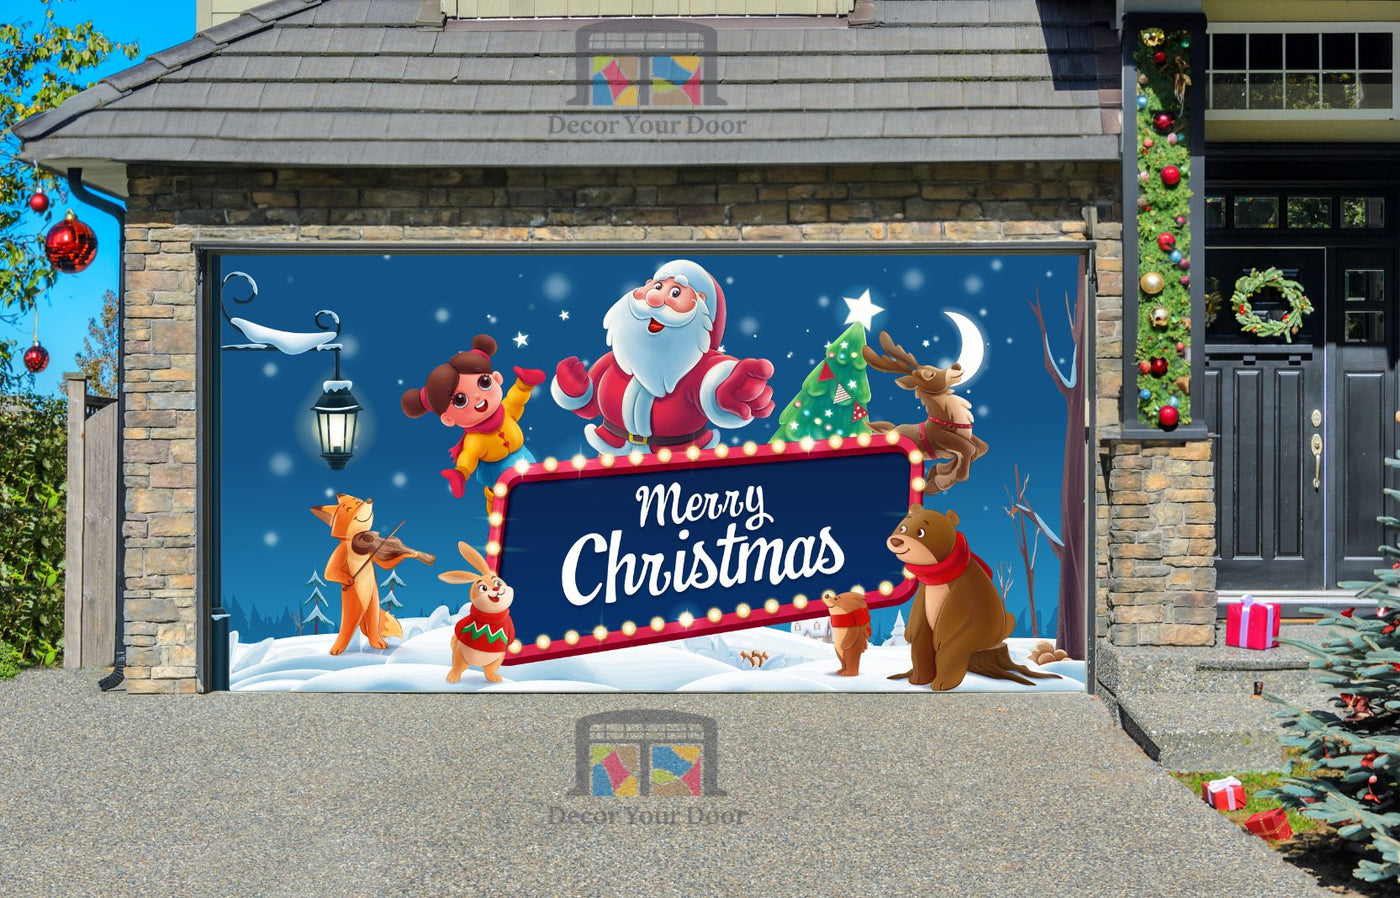 Santa Claus With His Friends On Christmas Day Garage Door Wrap Cover Mural Decoration